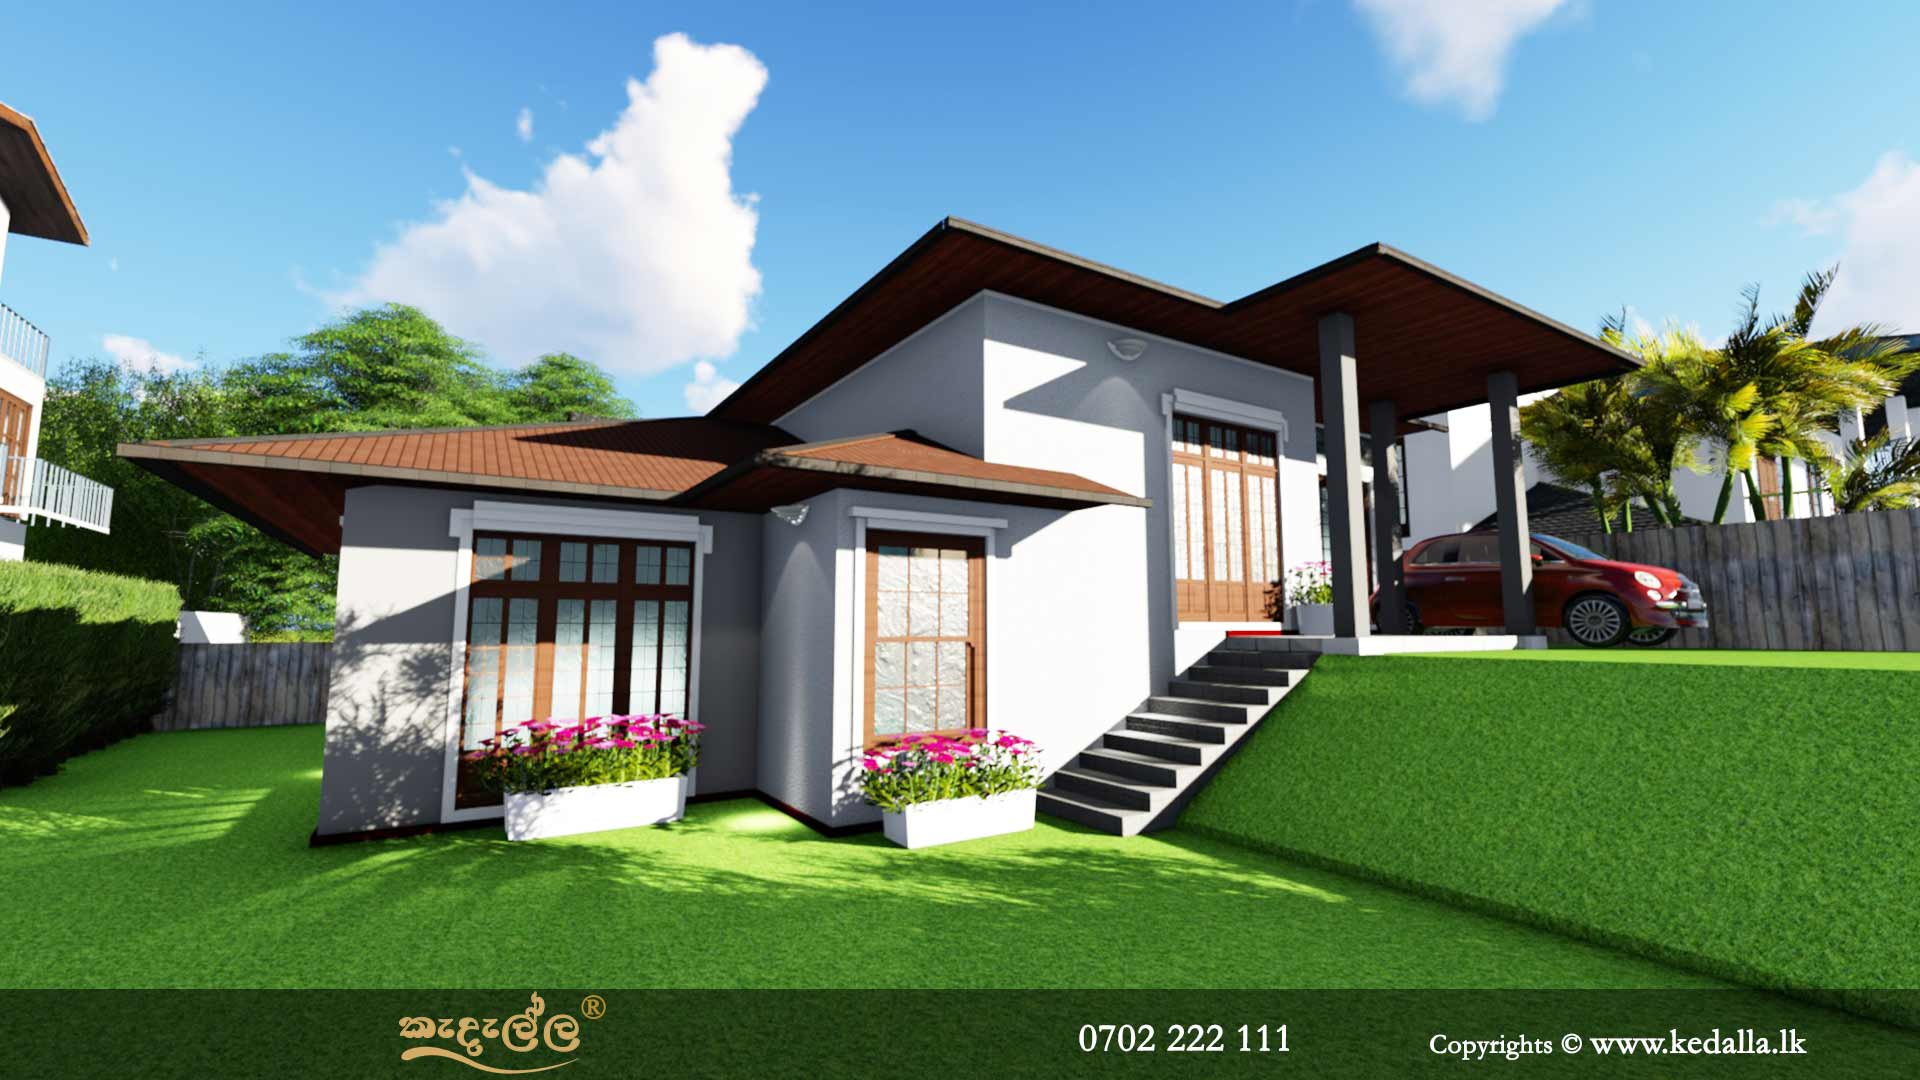 The best small house plans single story suitable for most of the steep land areas.This includes a sloped backyard. landscape and and garden also design for the sloped land.Provided an external staircase to access the left side of the front side garden.Finally the plas is well suited for the steep blocks of land